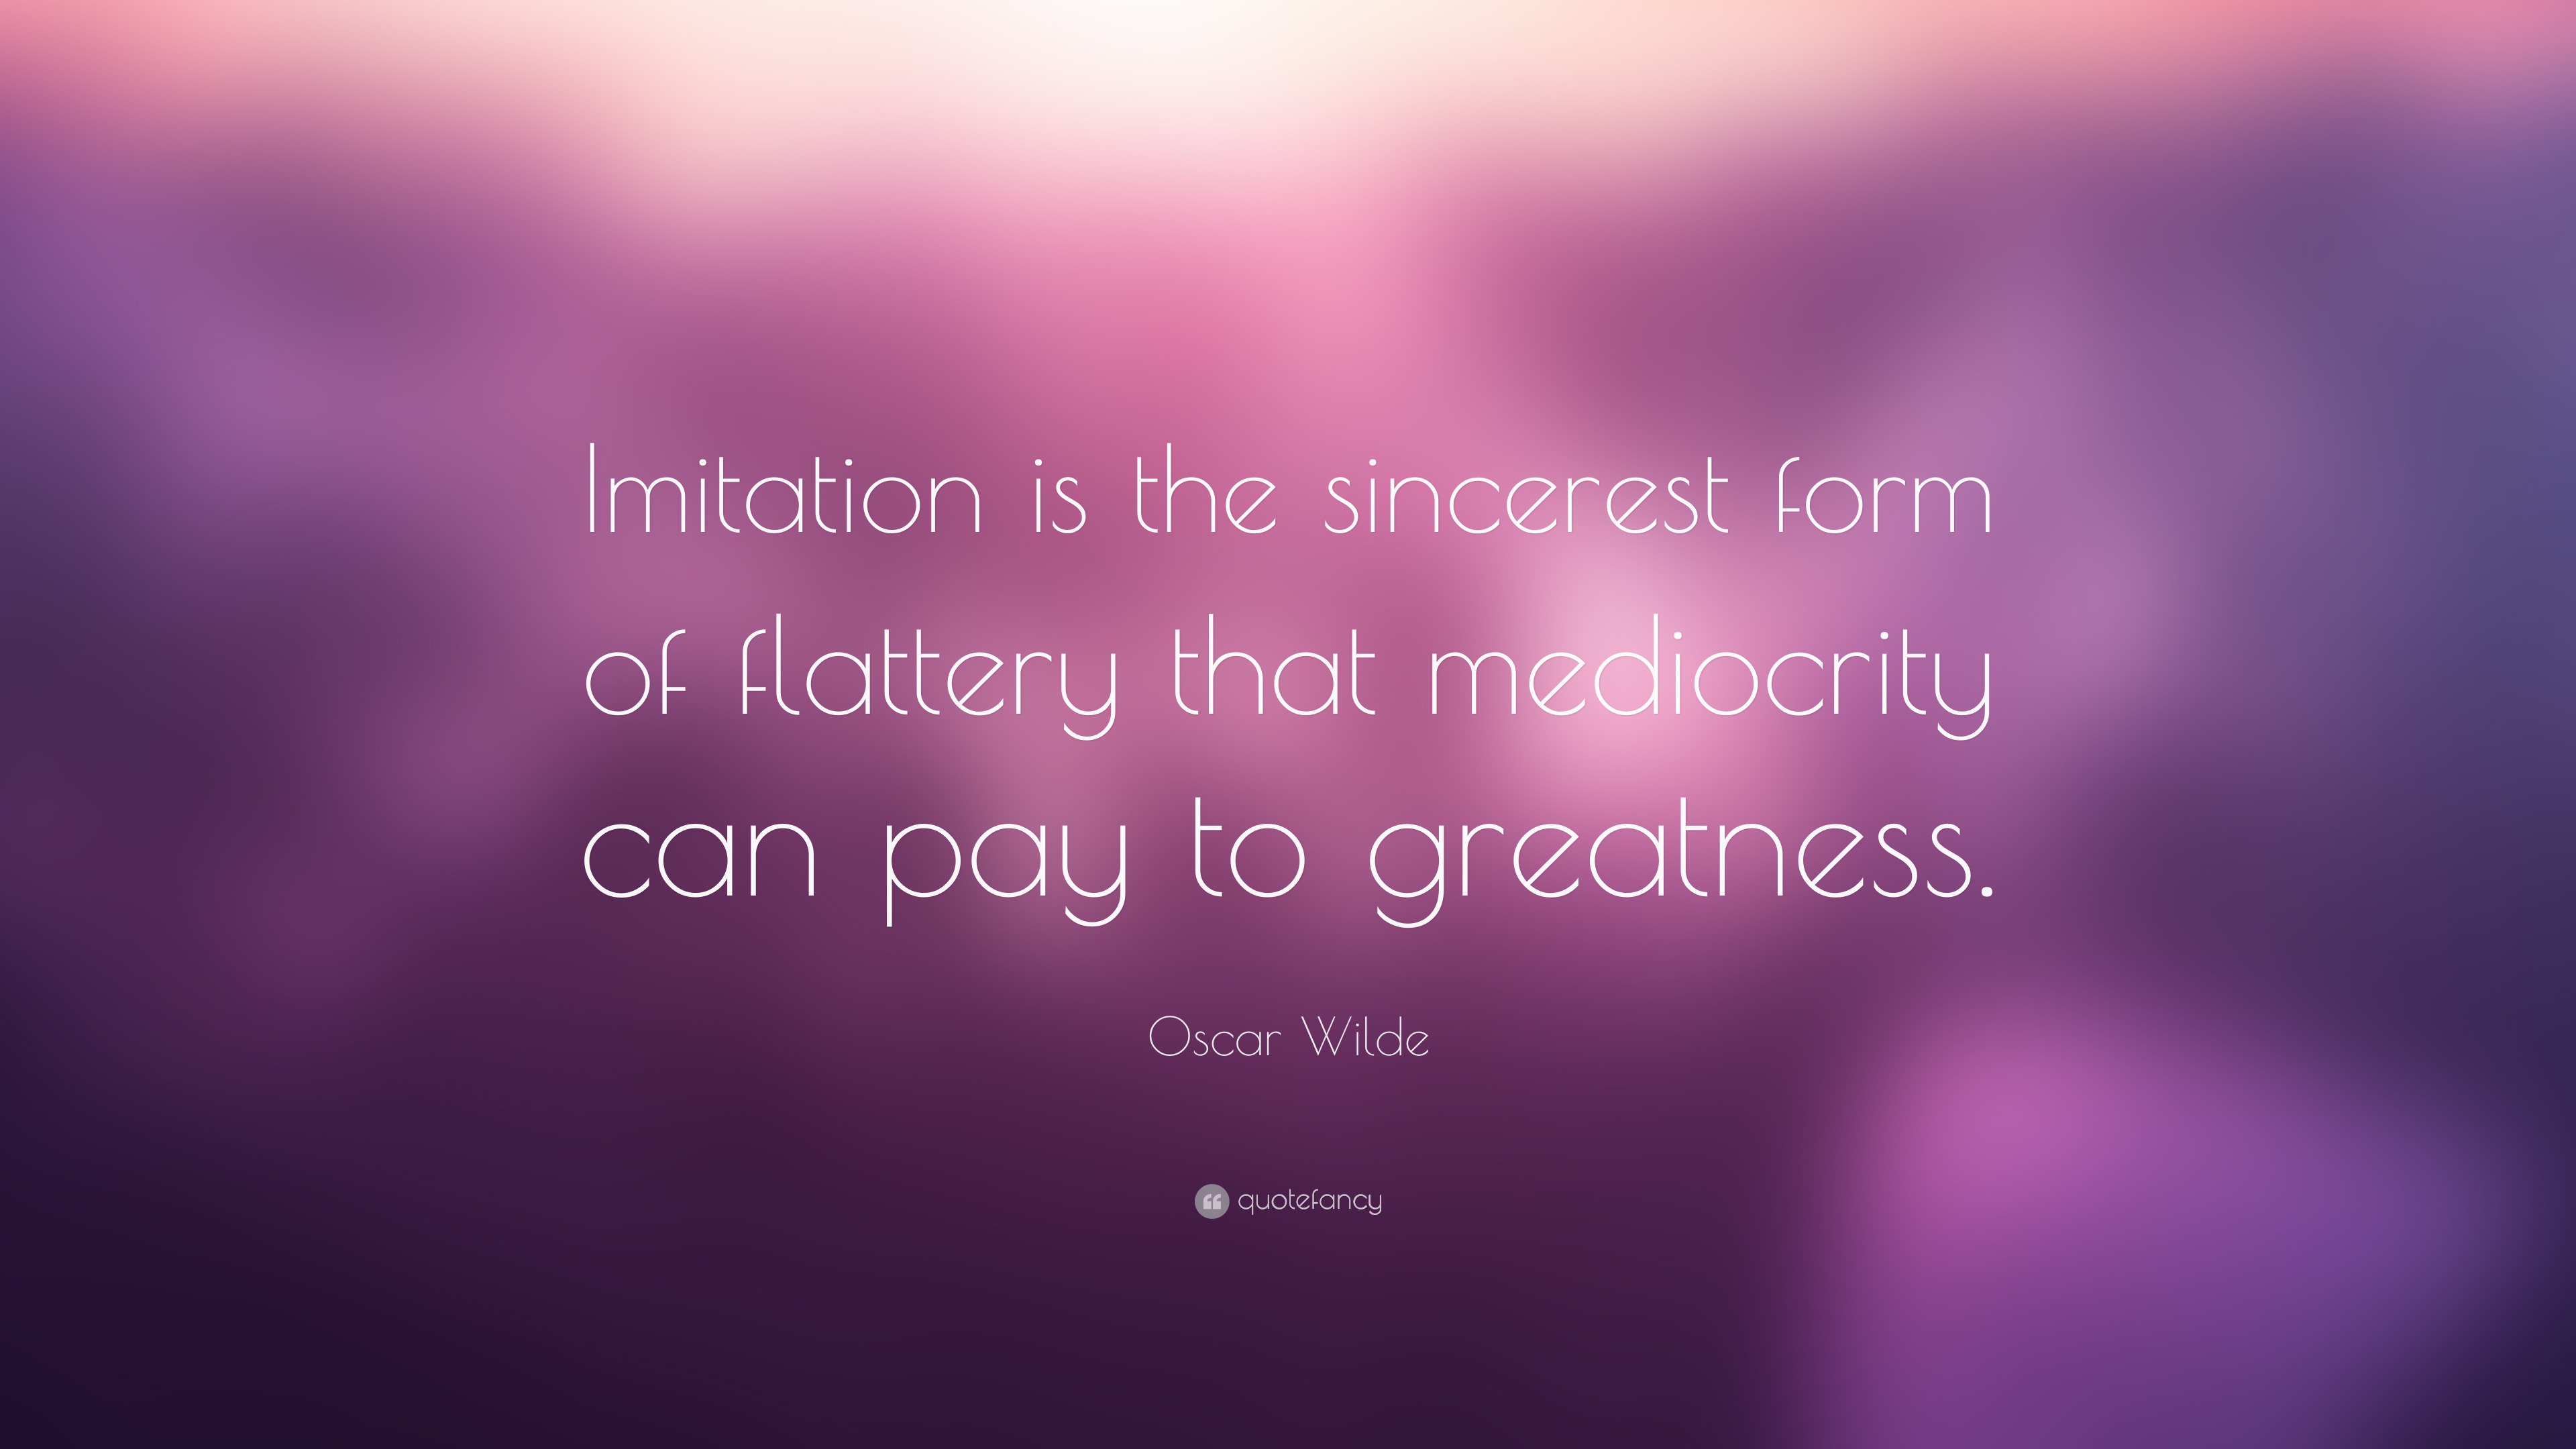 Oscar Wilde Quote: “Imitation is the sincerest form of flattery that